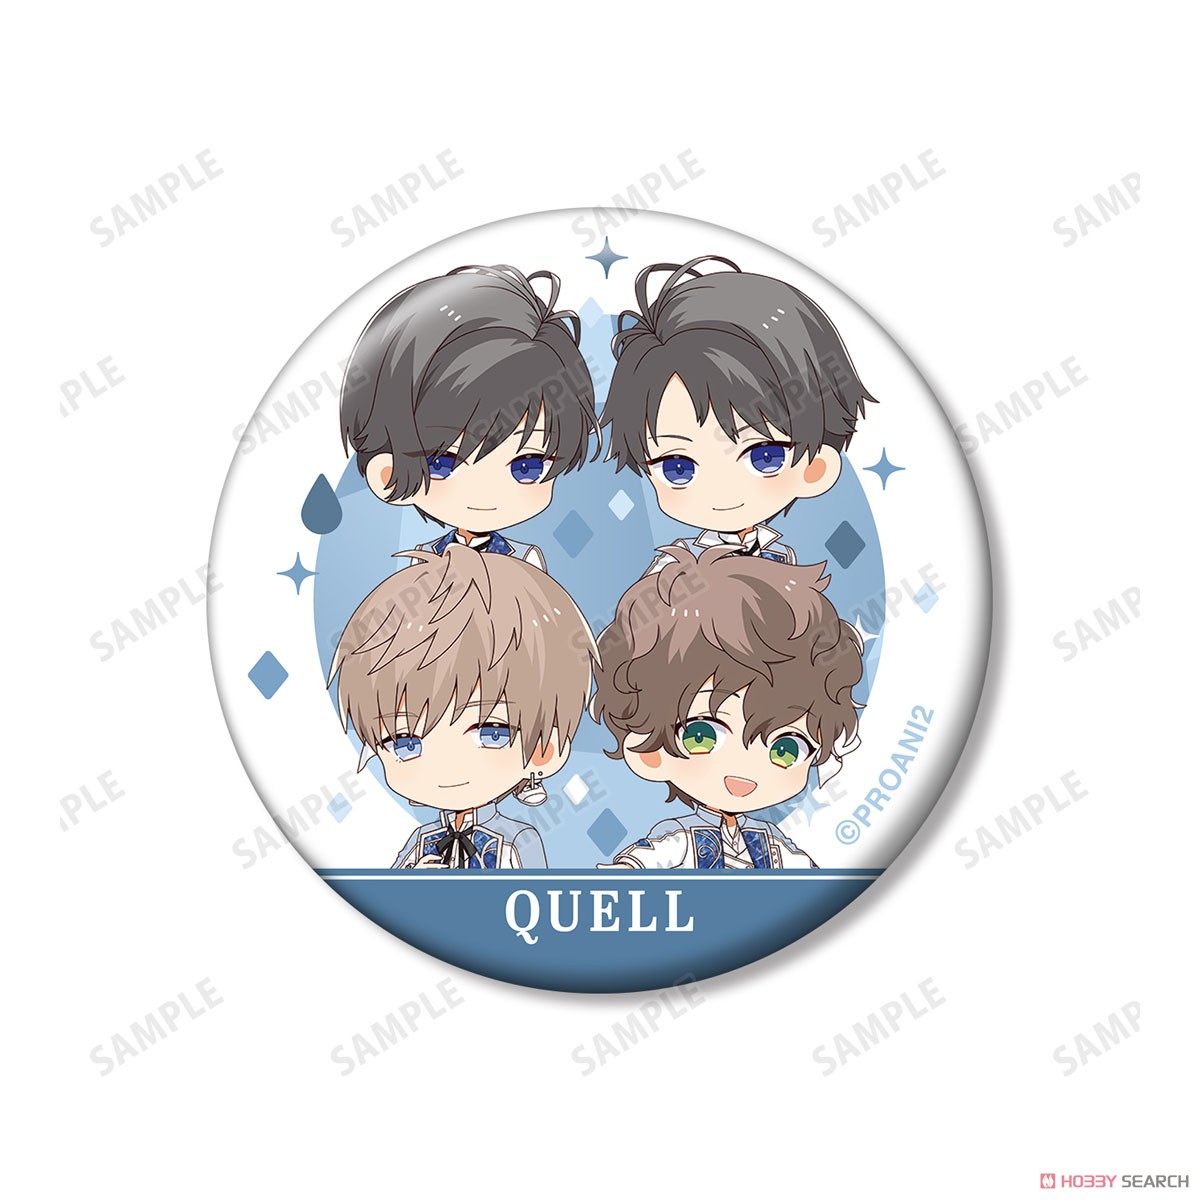 TSUKIPRO THE ANIMATION 2 QUELL 缶バッジ付きプチ缶ケース (キャラクターグッズ) 商品画像3